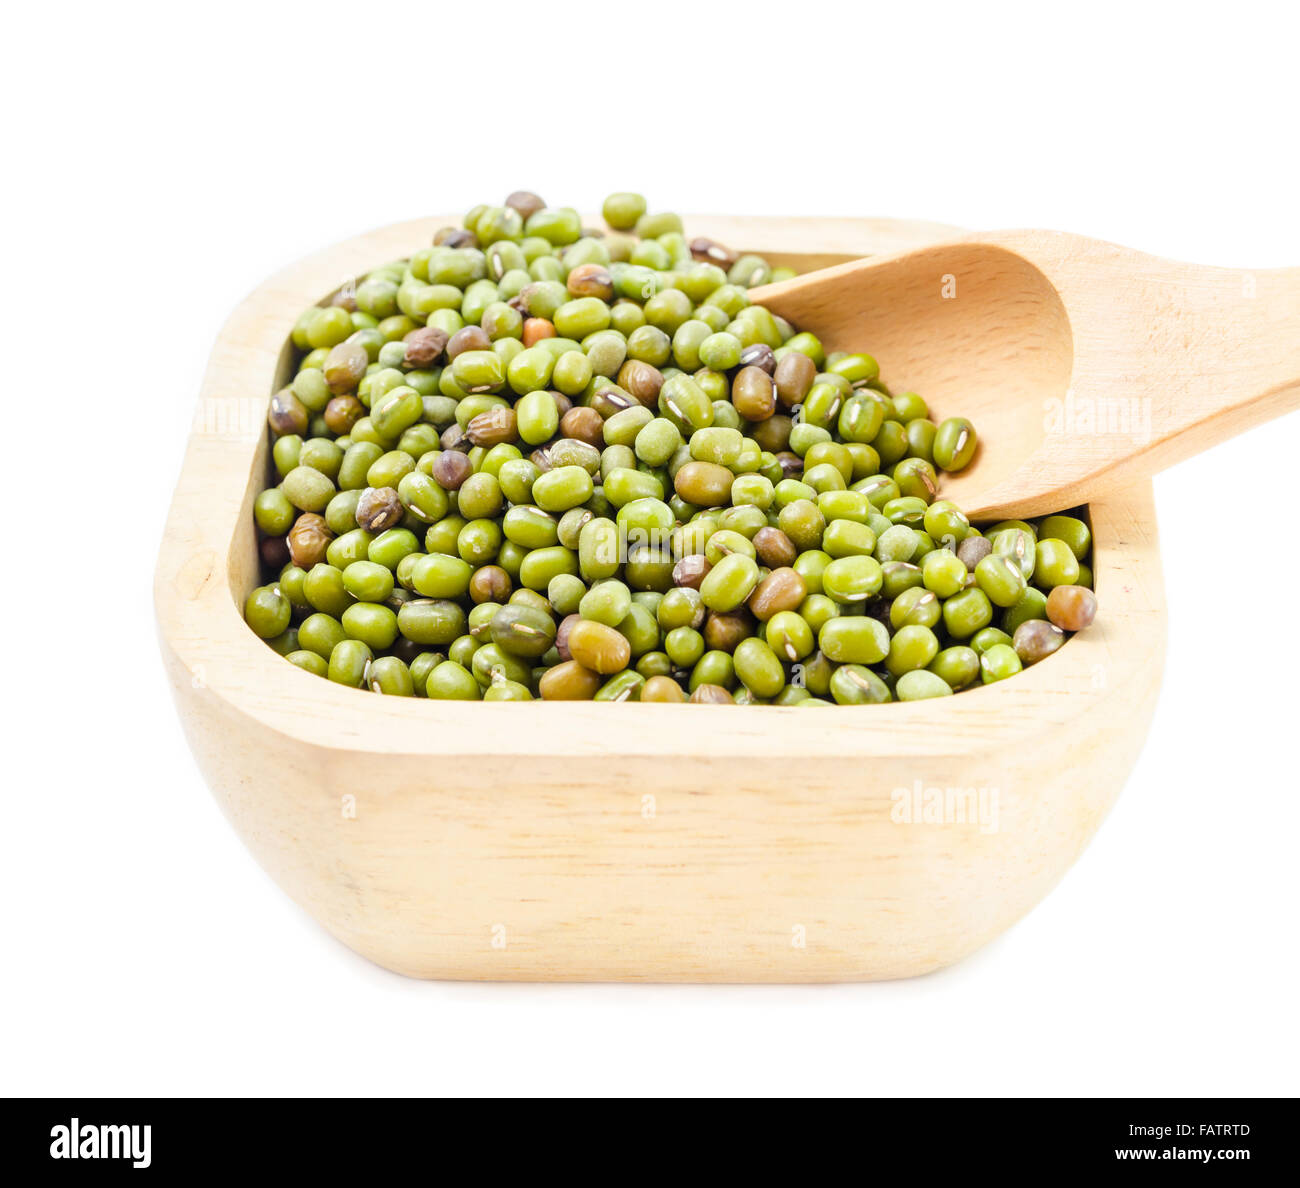 Healthy vegetarian super foods ingredient mung beans in wood cup on white background. Stock Photo